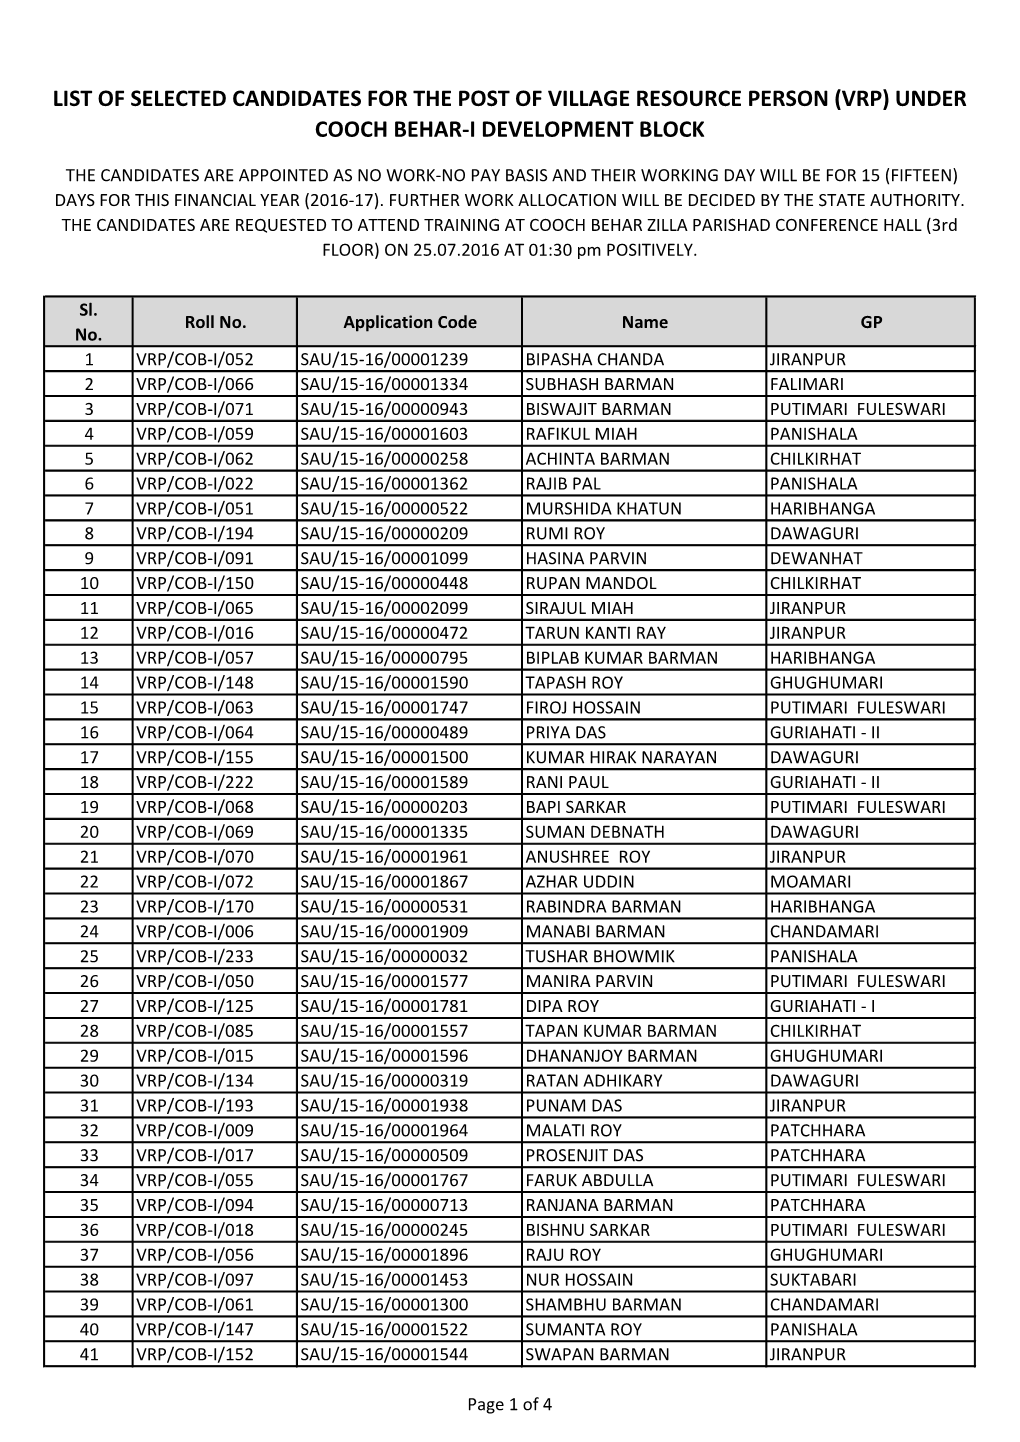 List of Selected Candidates for the Post of Village Resource Person (Vrp) Under Cooch Behar-I Development Block